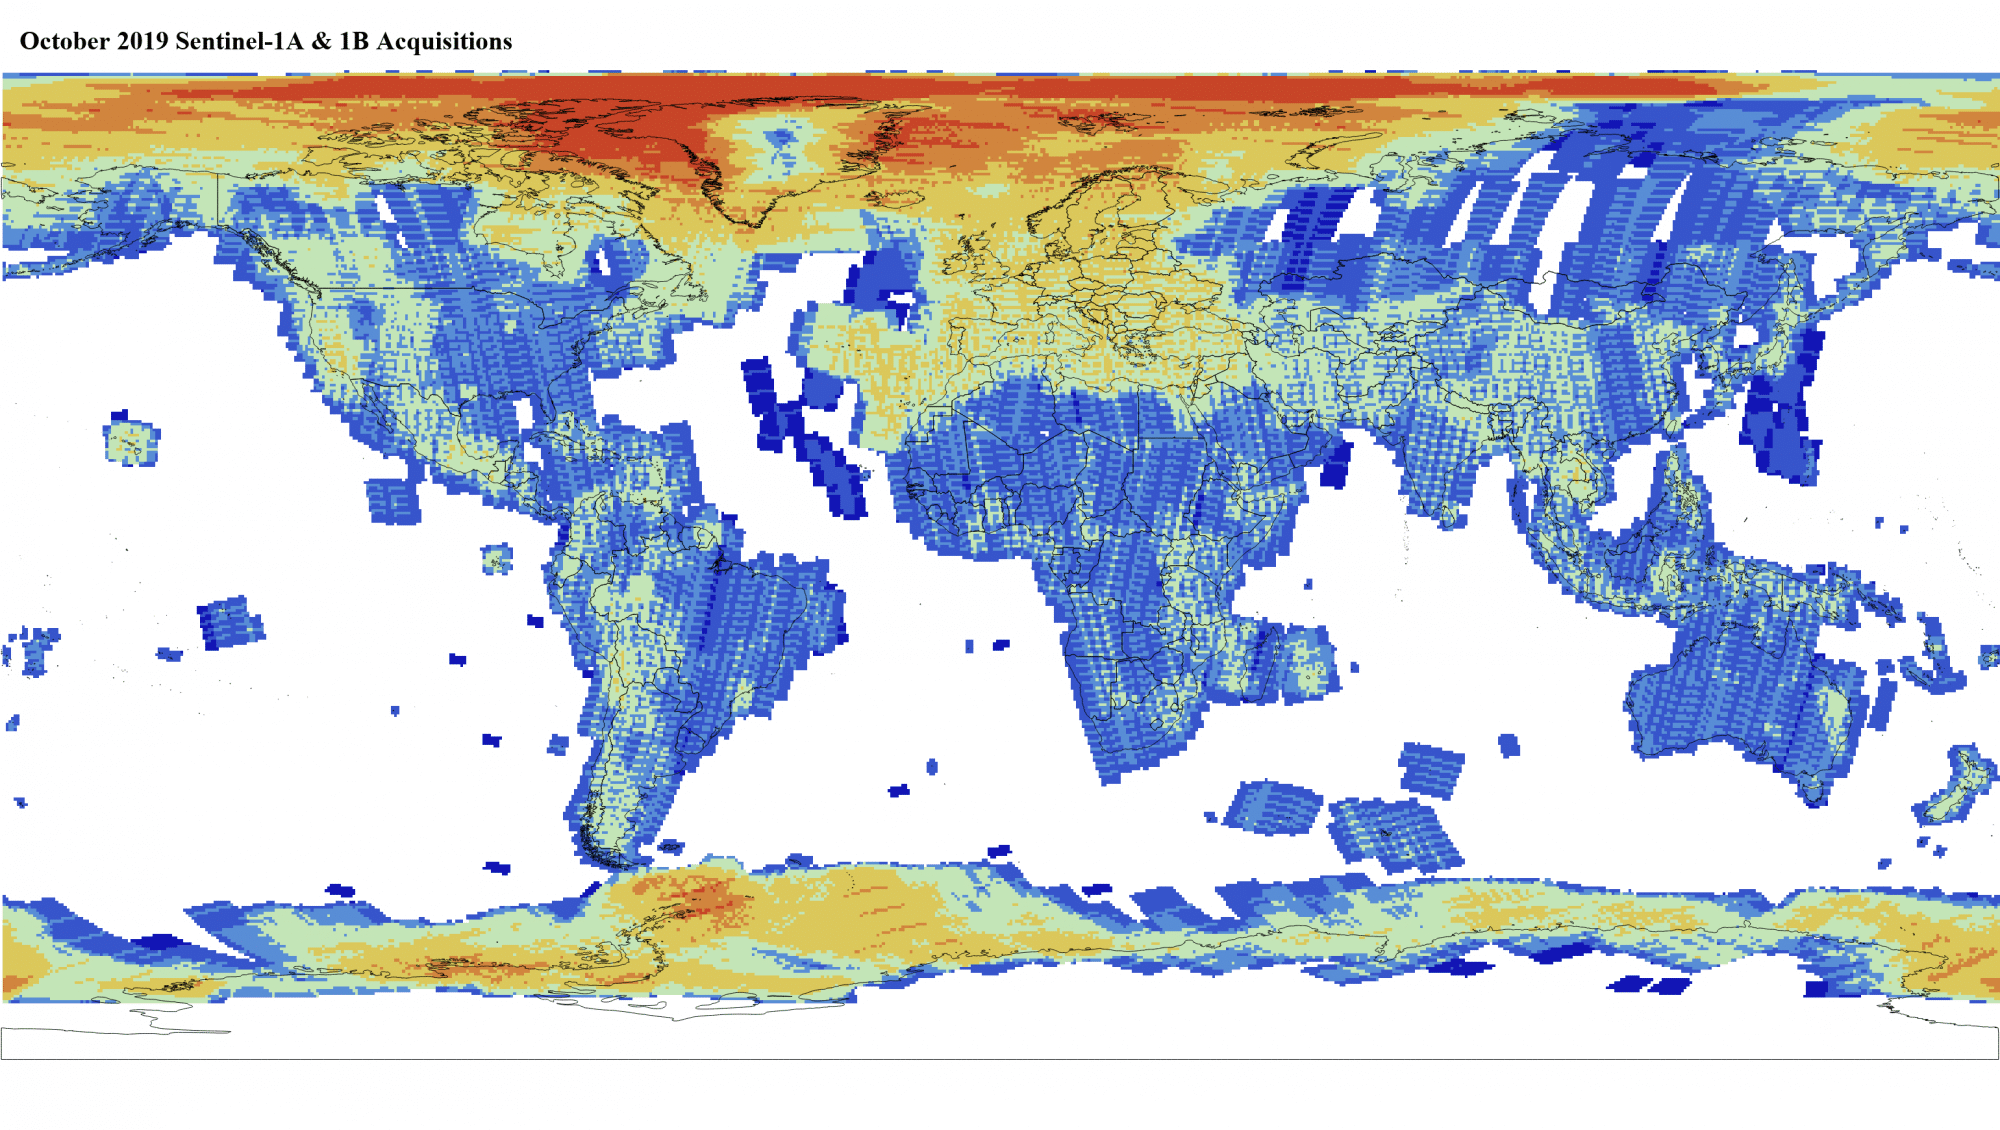 Heat map of Sentinel-1A and -1B GRD global acquisitions October 2019